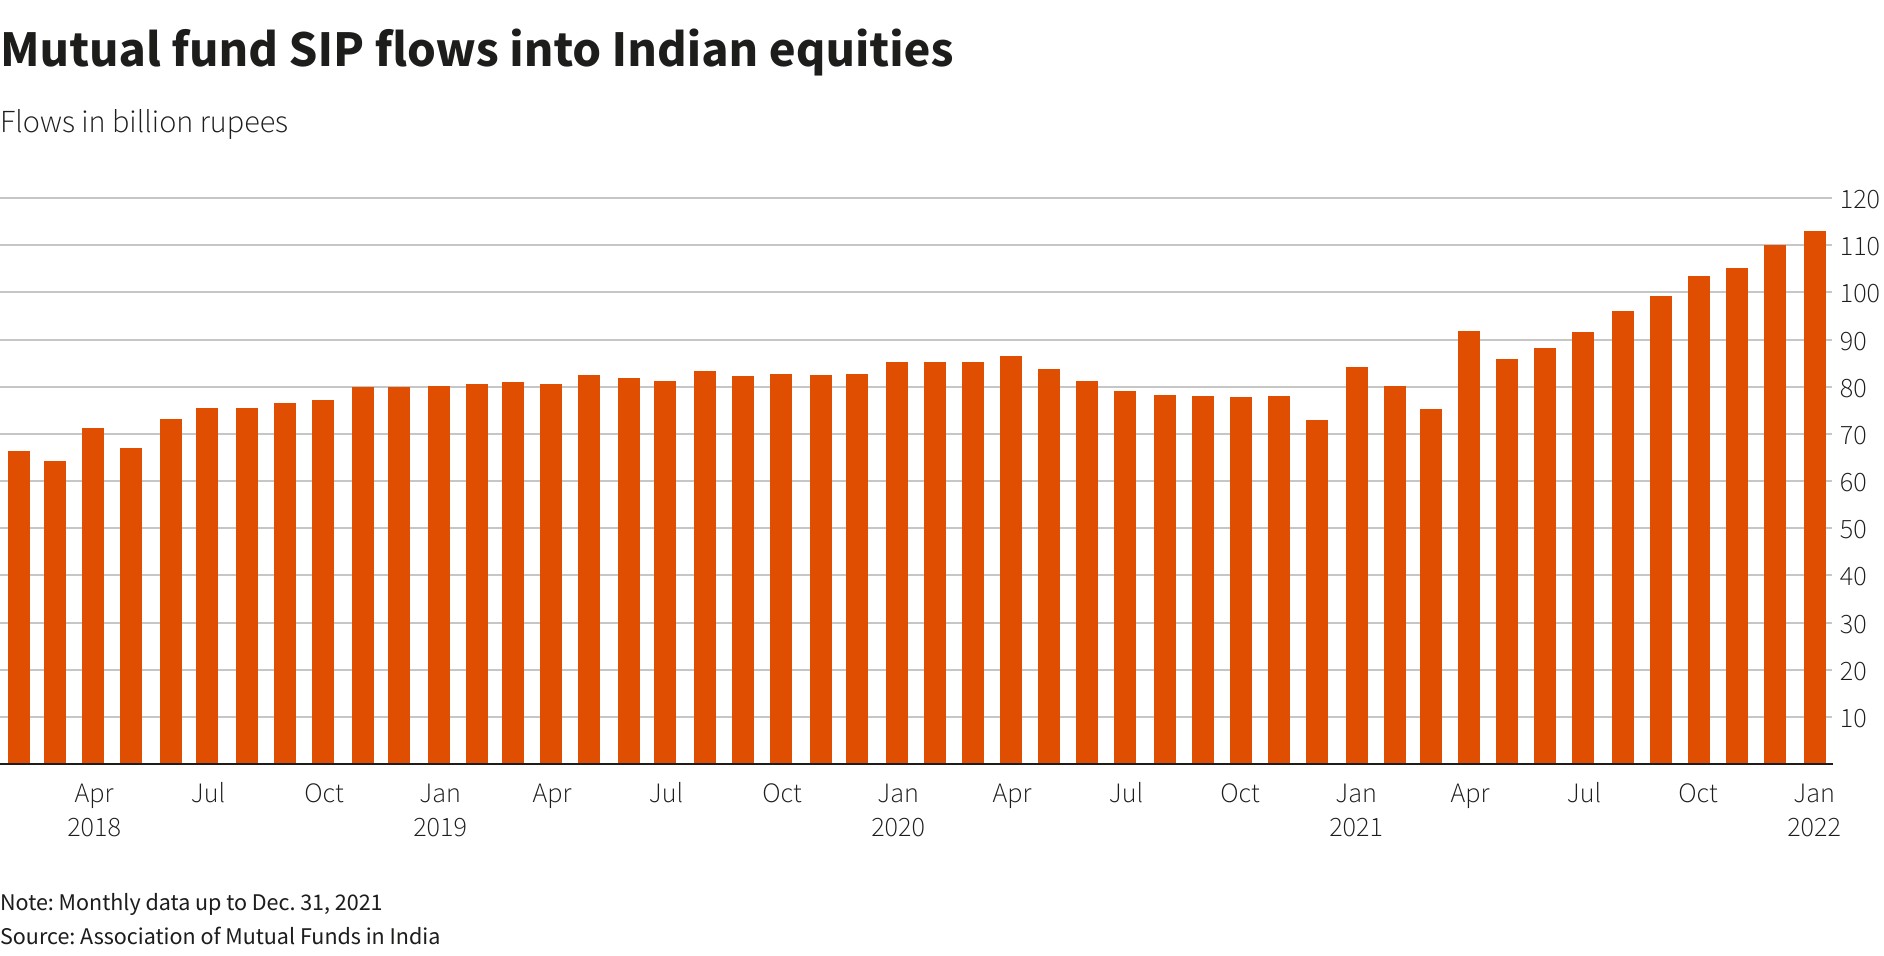 Mutual fund SIP flows into Indian equities